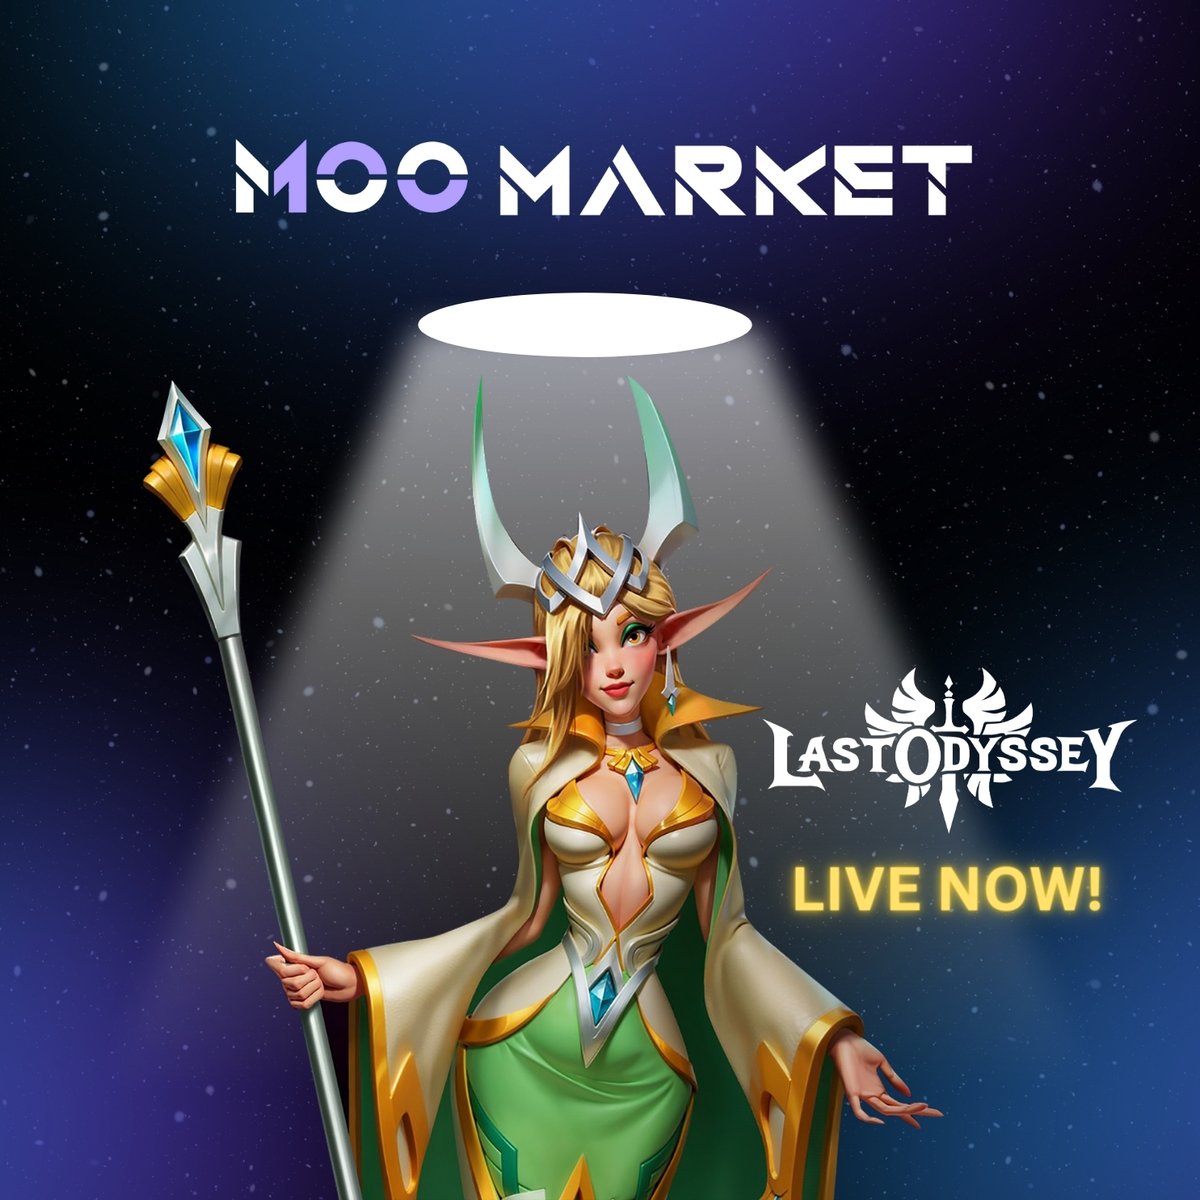 Next launch revealed:
Welcome, @LastOdyssey_io!

#LastOdyssey is a real-time strategy game by @EVG_Ventures, invested by @OKX_Ventures. Their Genesis Pass collection can summon heroes and help enhance exploration and recruitment abilities.

Mint Info: 
Total NFT Supply: 888
Mint